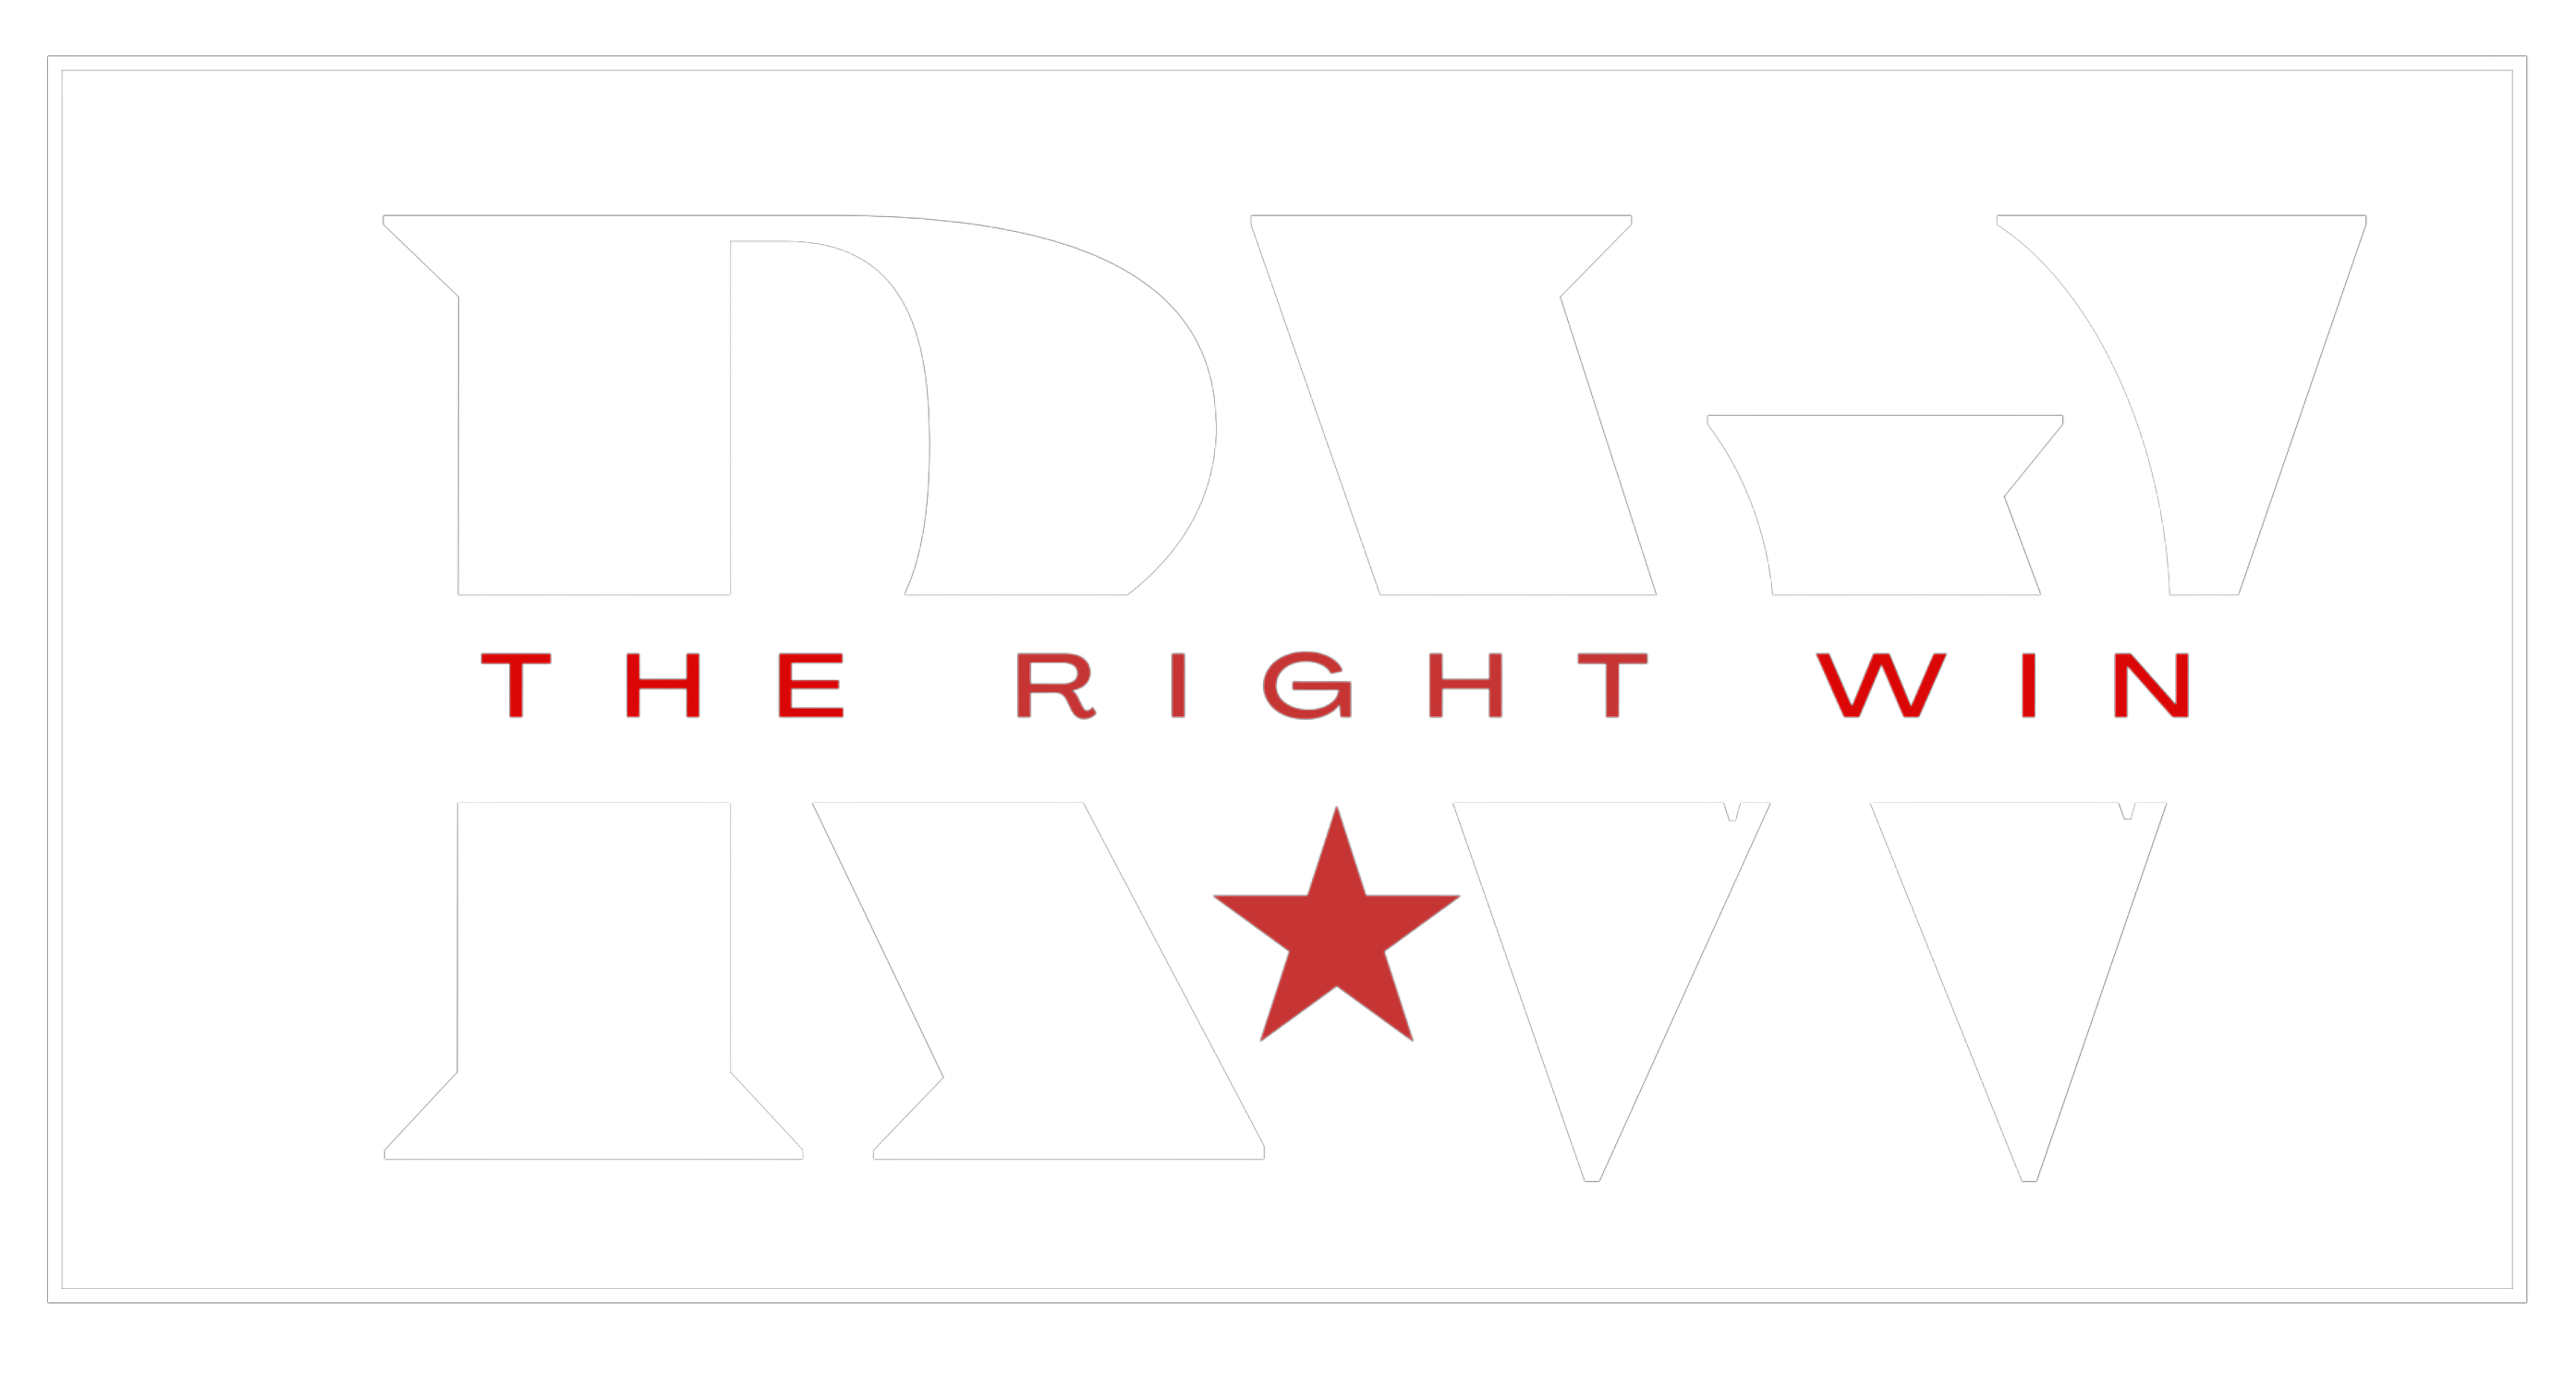 https://therightwin.com/wp-content/uploads/2023/02/RW-logo-white.png